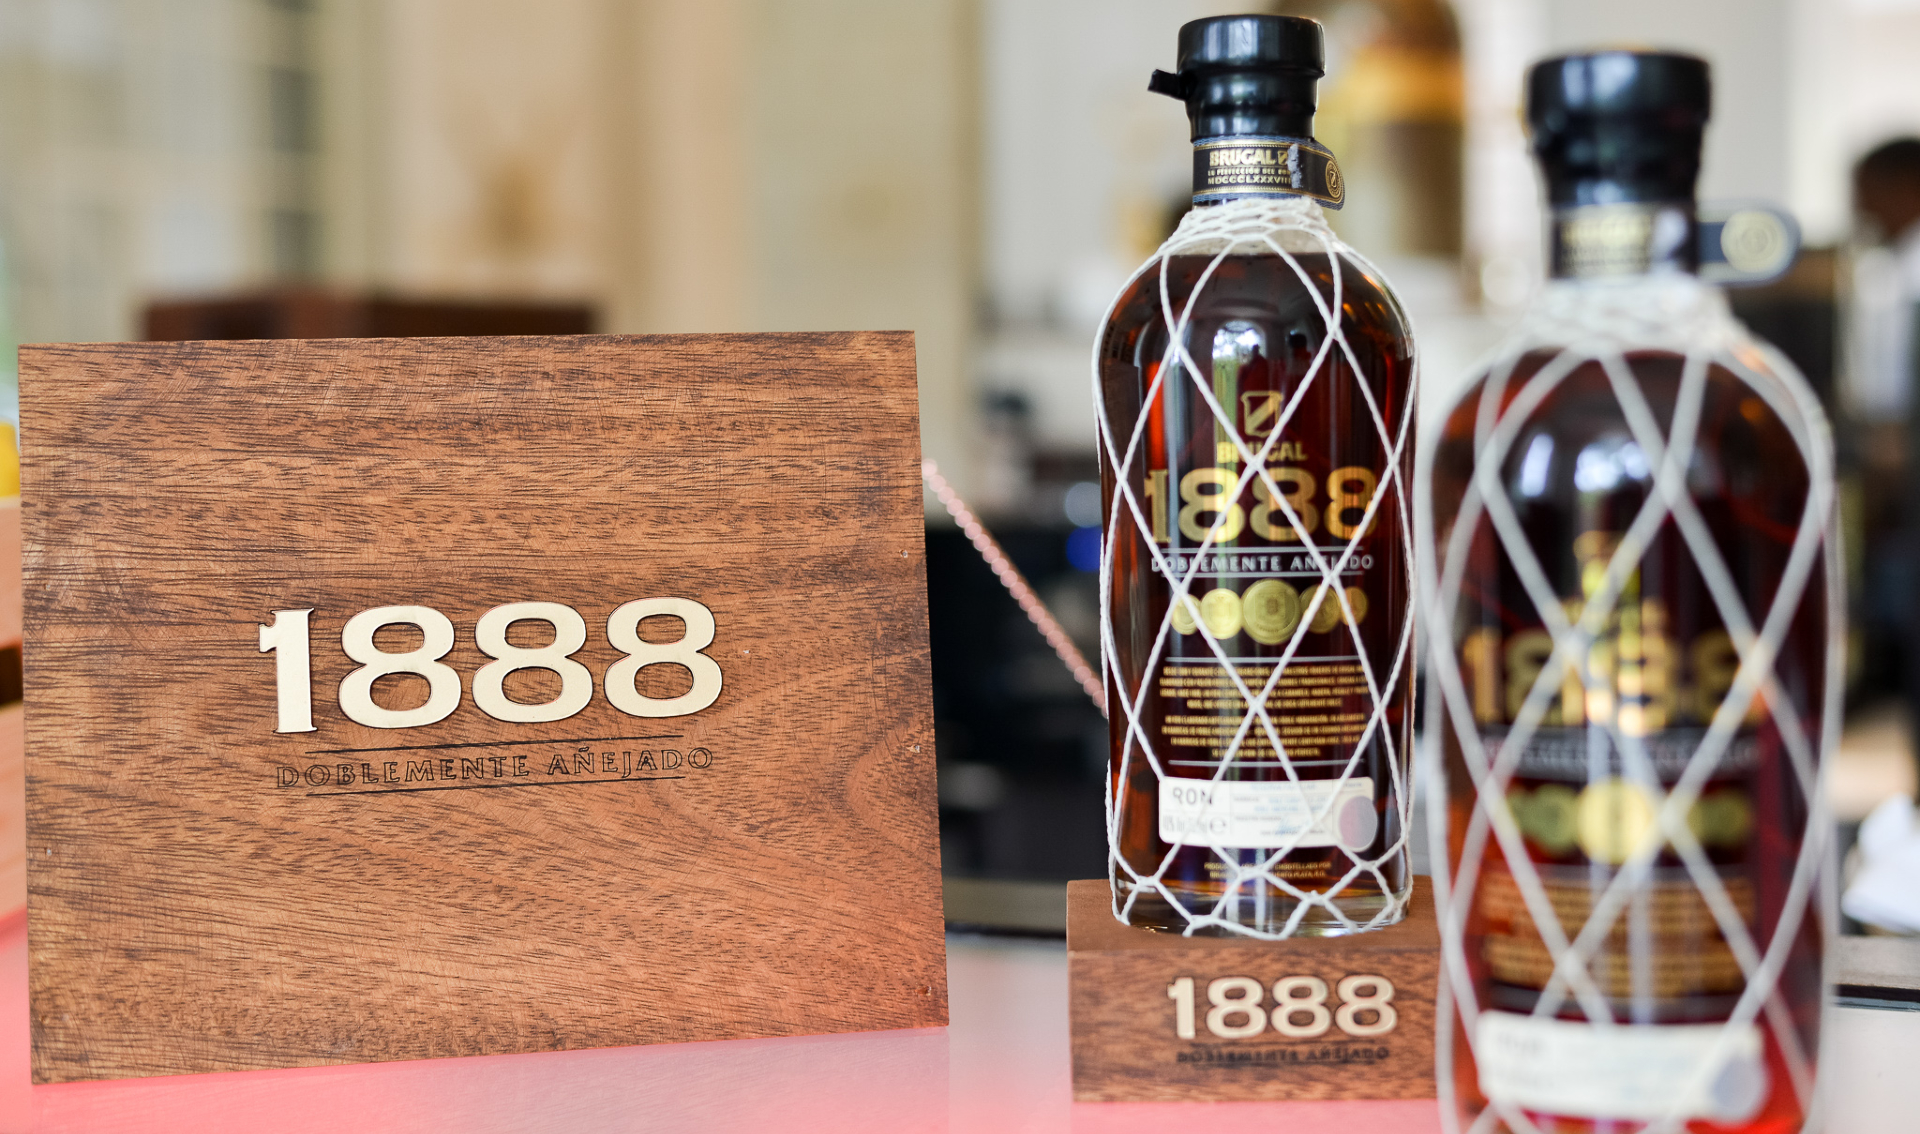 Brugal 1888 combines the rich flavours of bourbon and sherry casks through a double-ageing process.